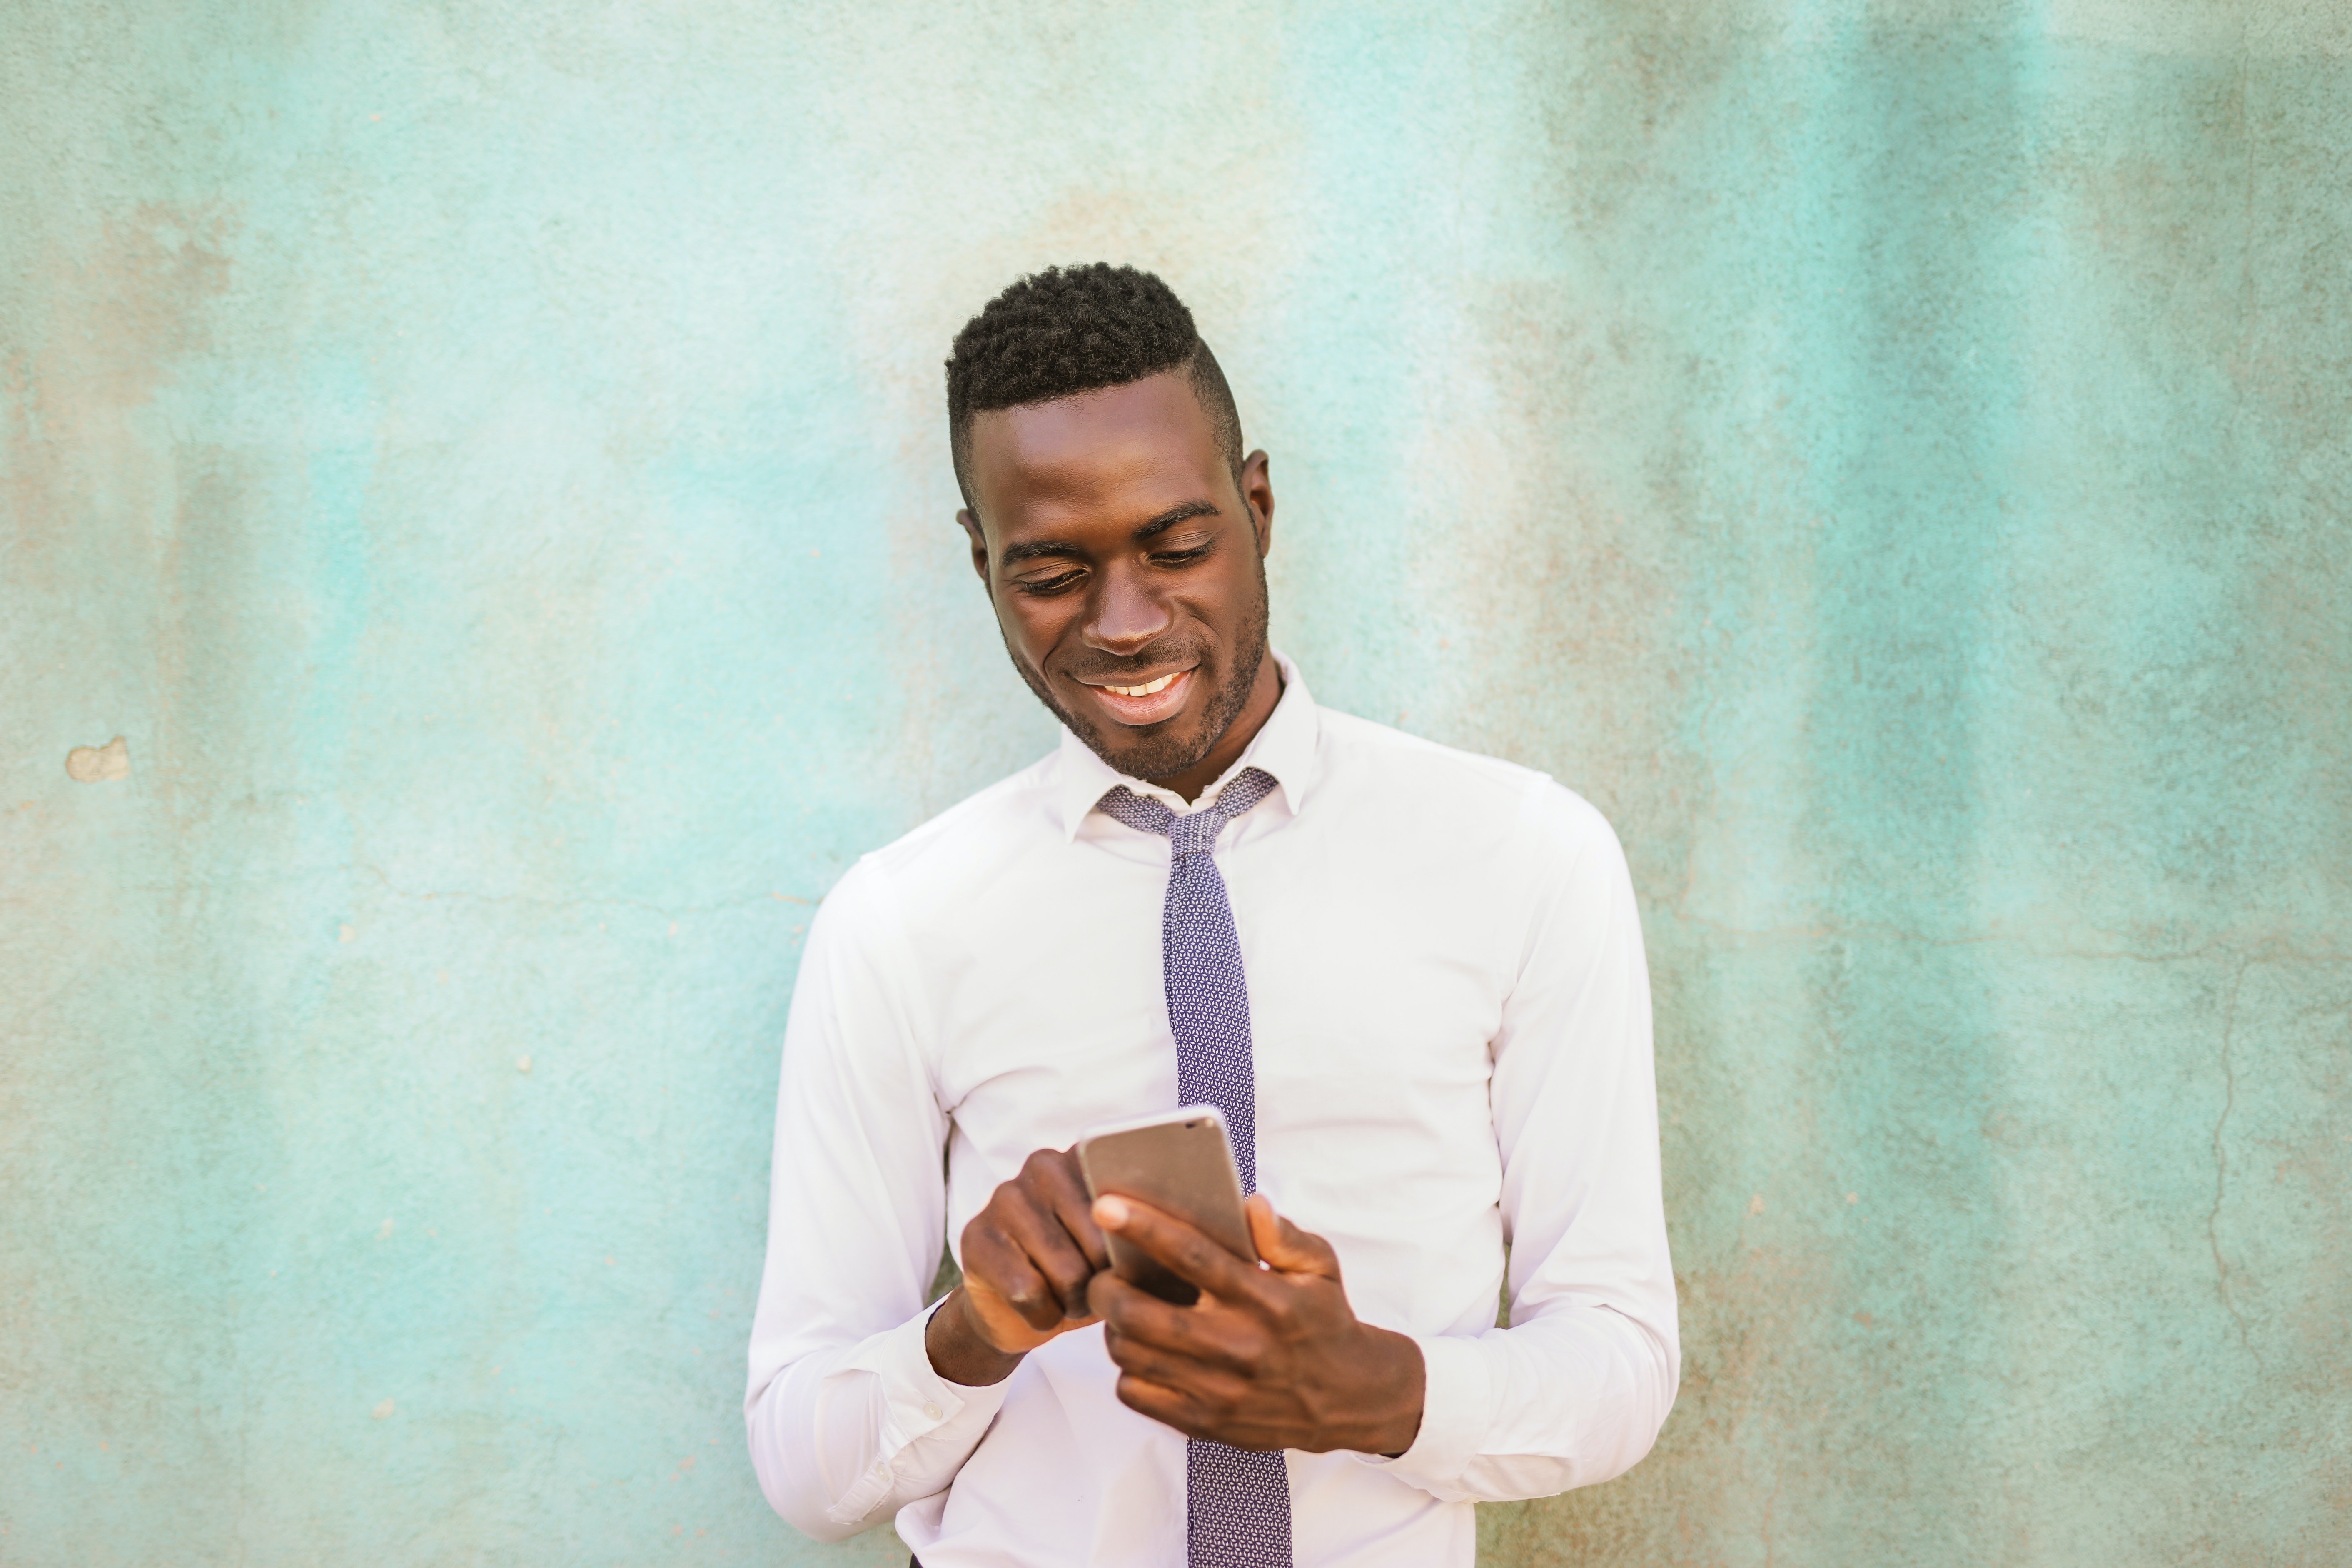 An attractive young black man stands against a concrete wall smiling while looking at his phone typing on it.